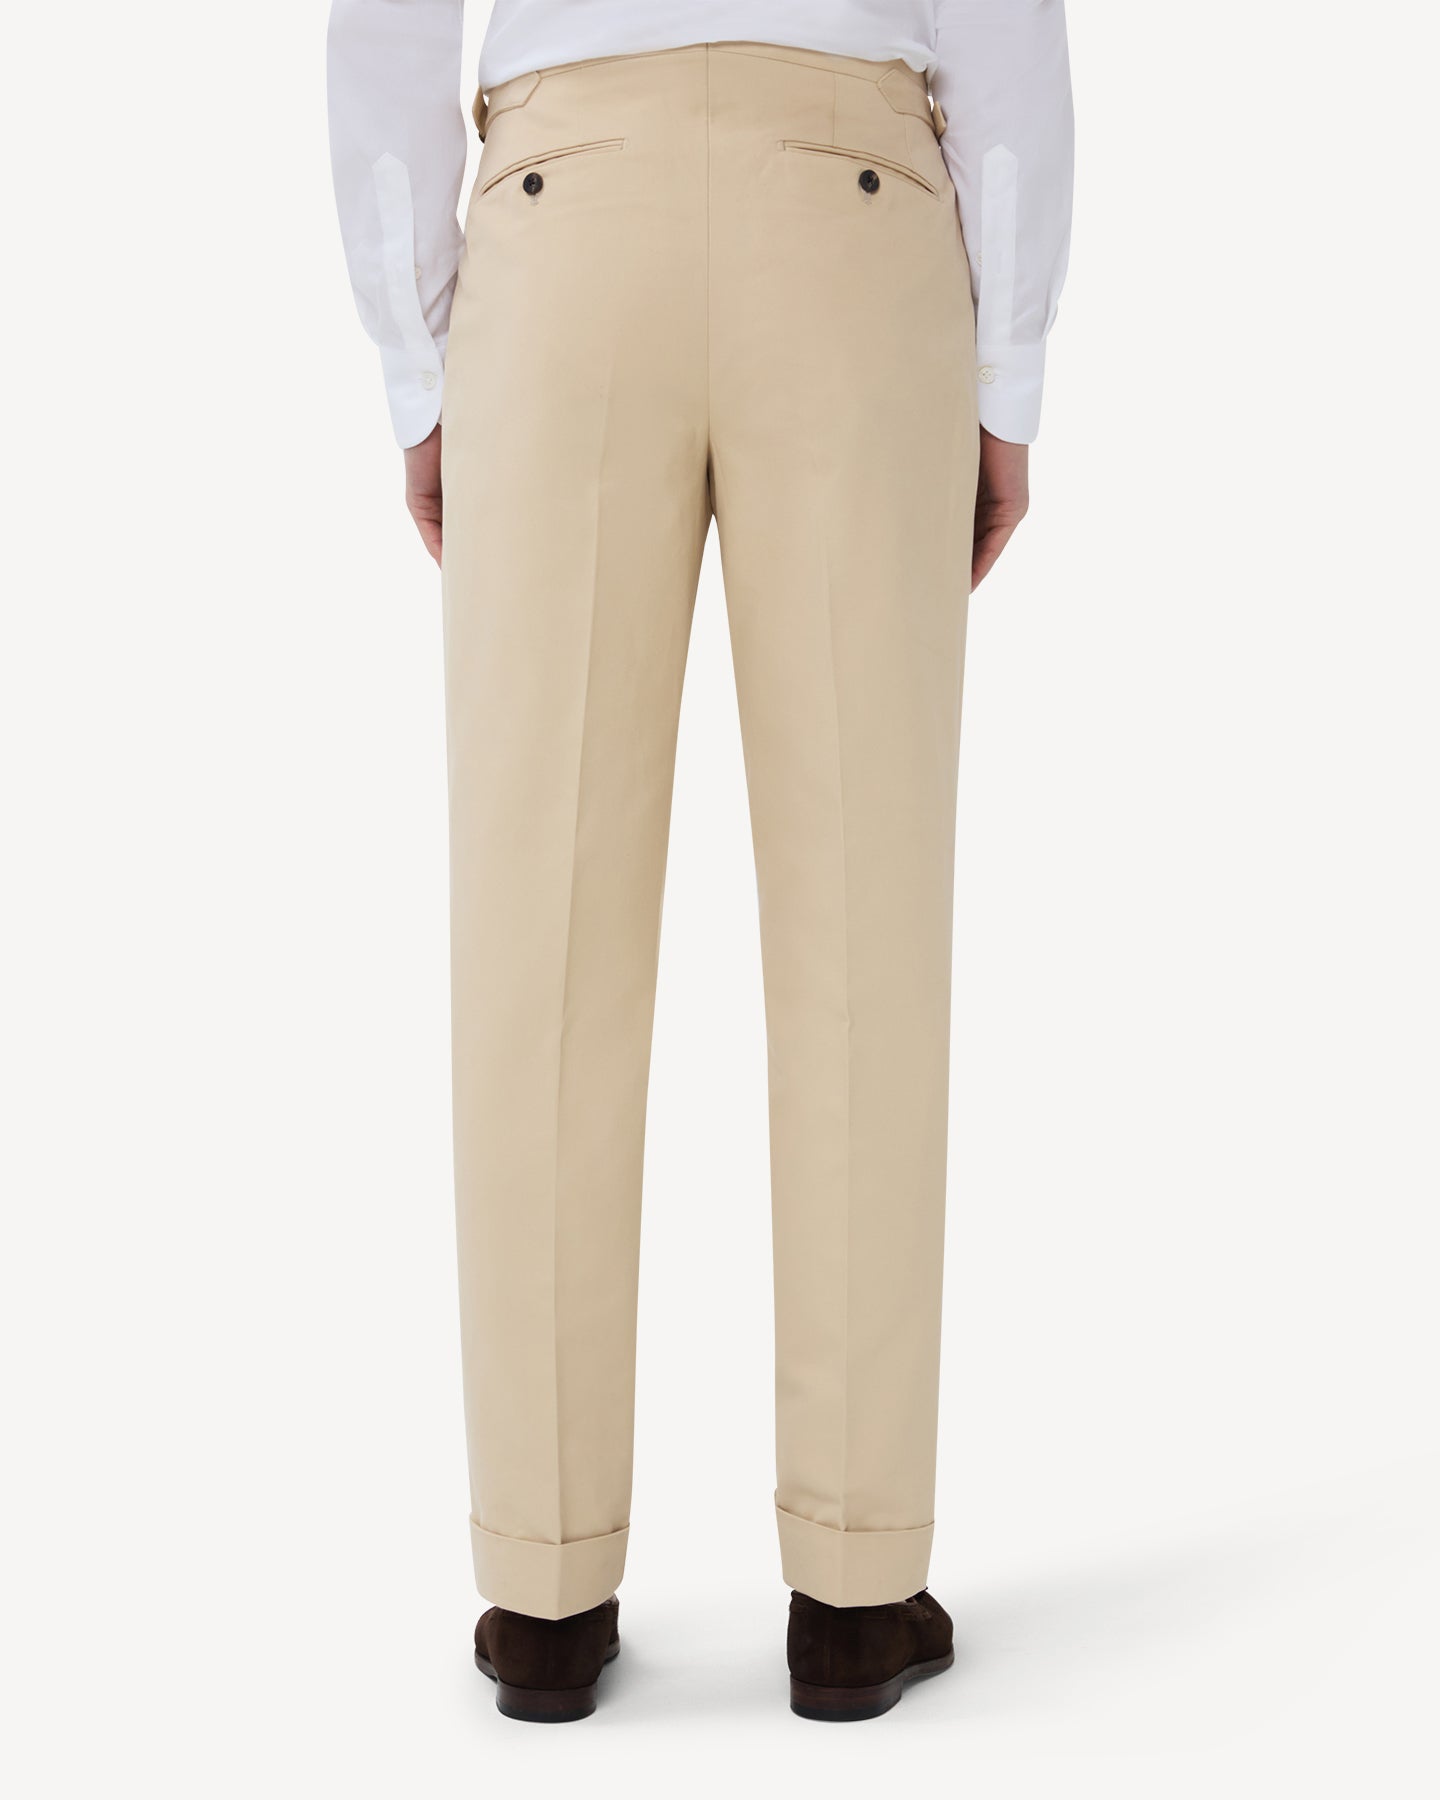 The back of cream cotton trousers with single pleats and side adjusters